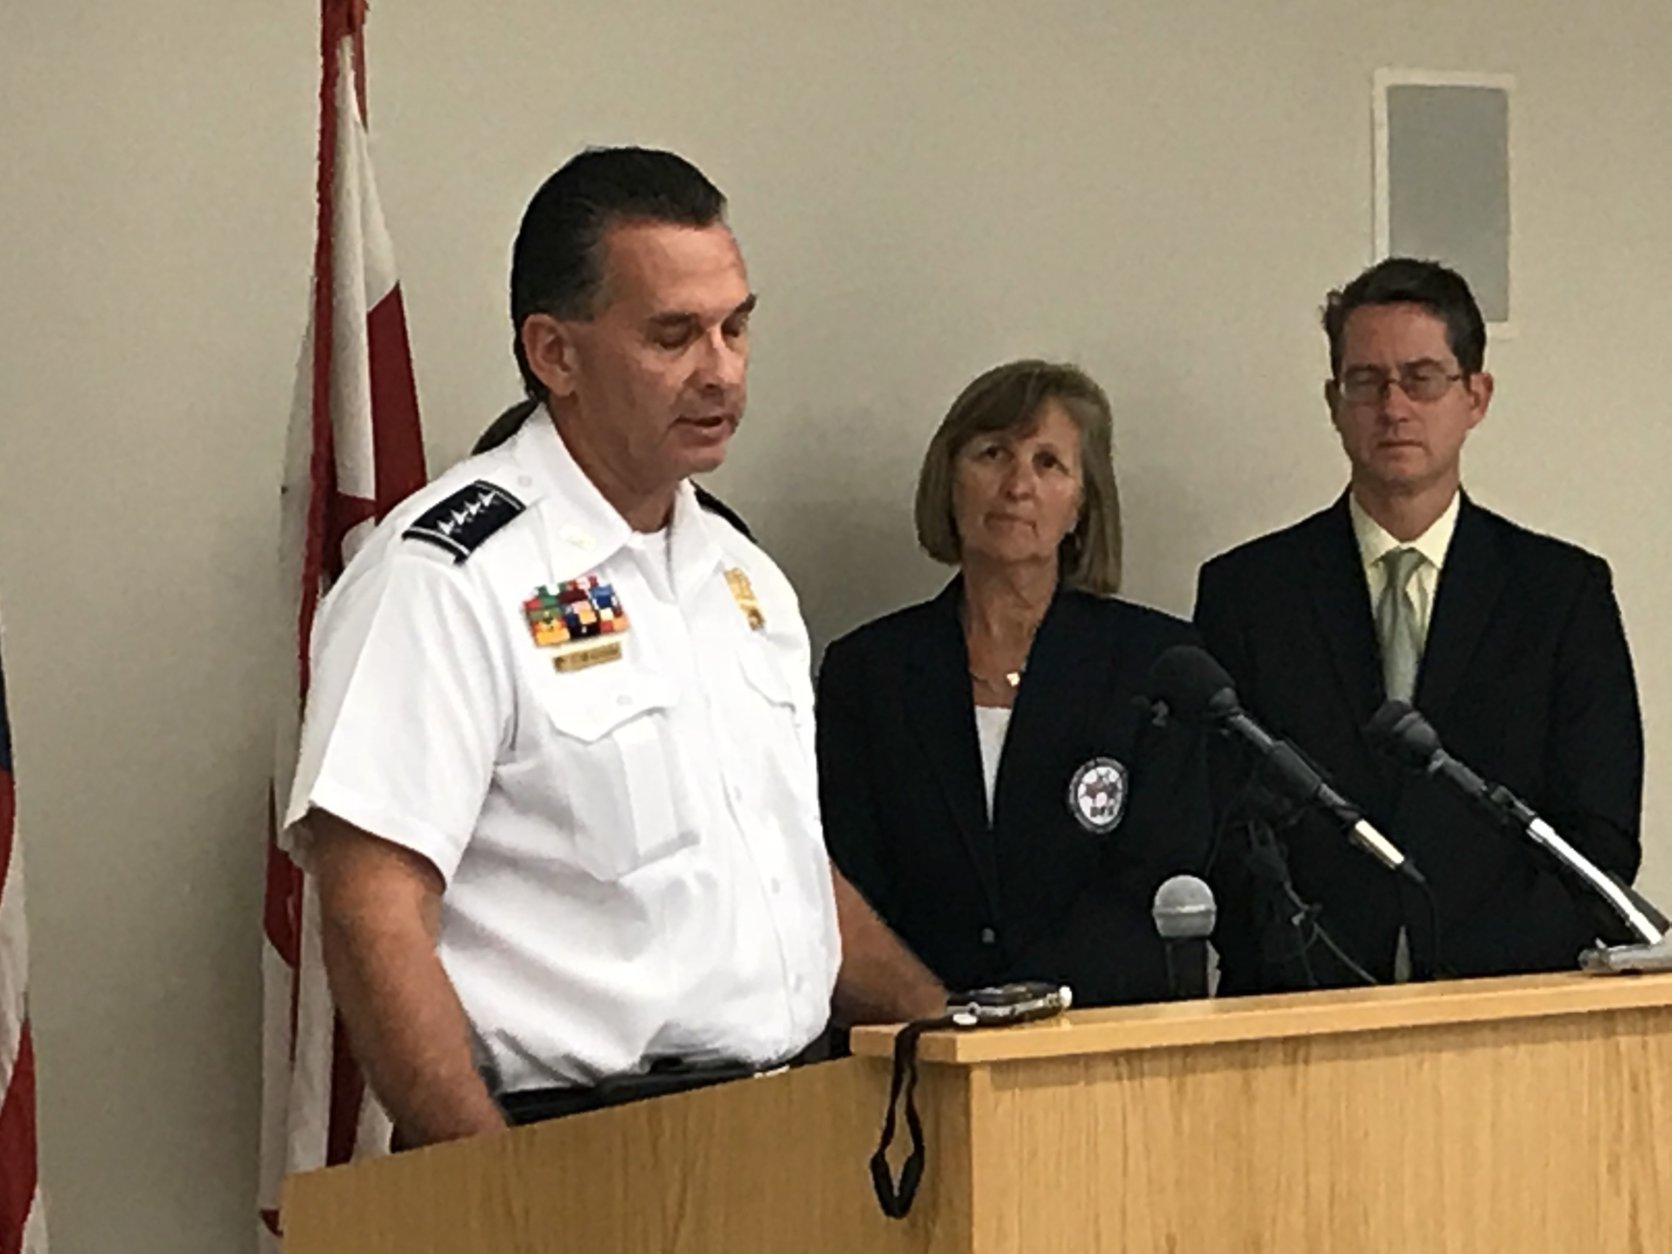 D.C. POlice Chief Peter Newsham announced the identities of three bodies found at an apartment building in Southeast in April. (WTOP/Michelle Basch)